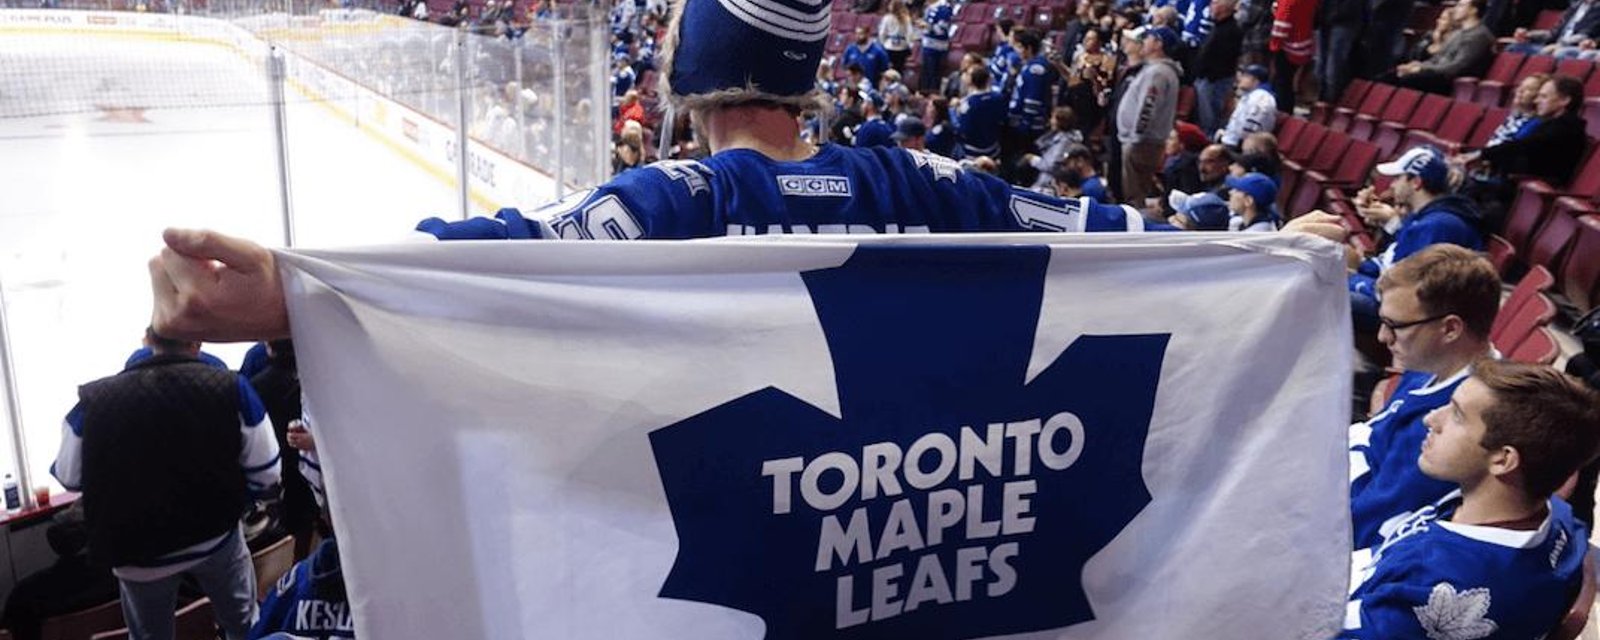 Leafs fan outrages people with distasteful sign 